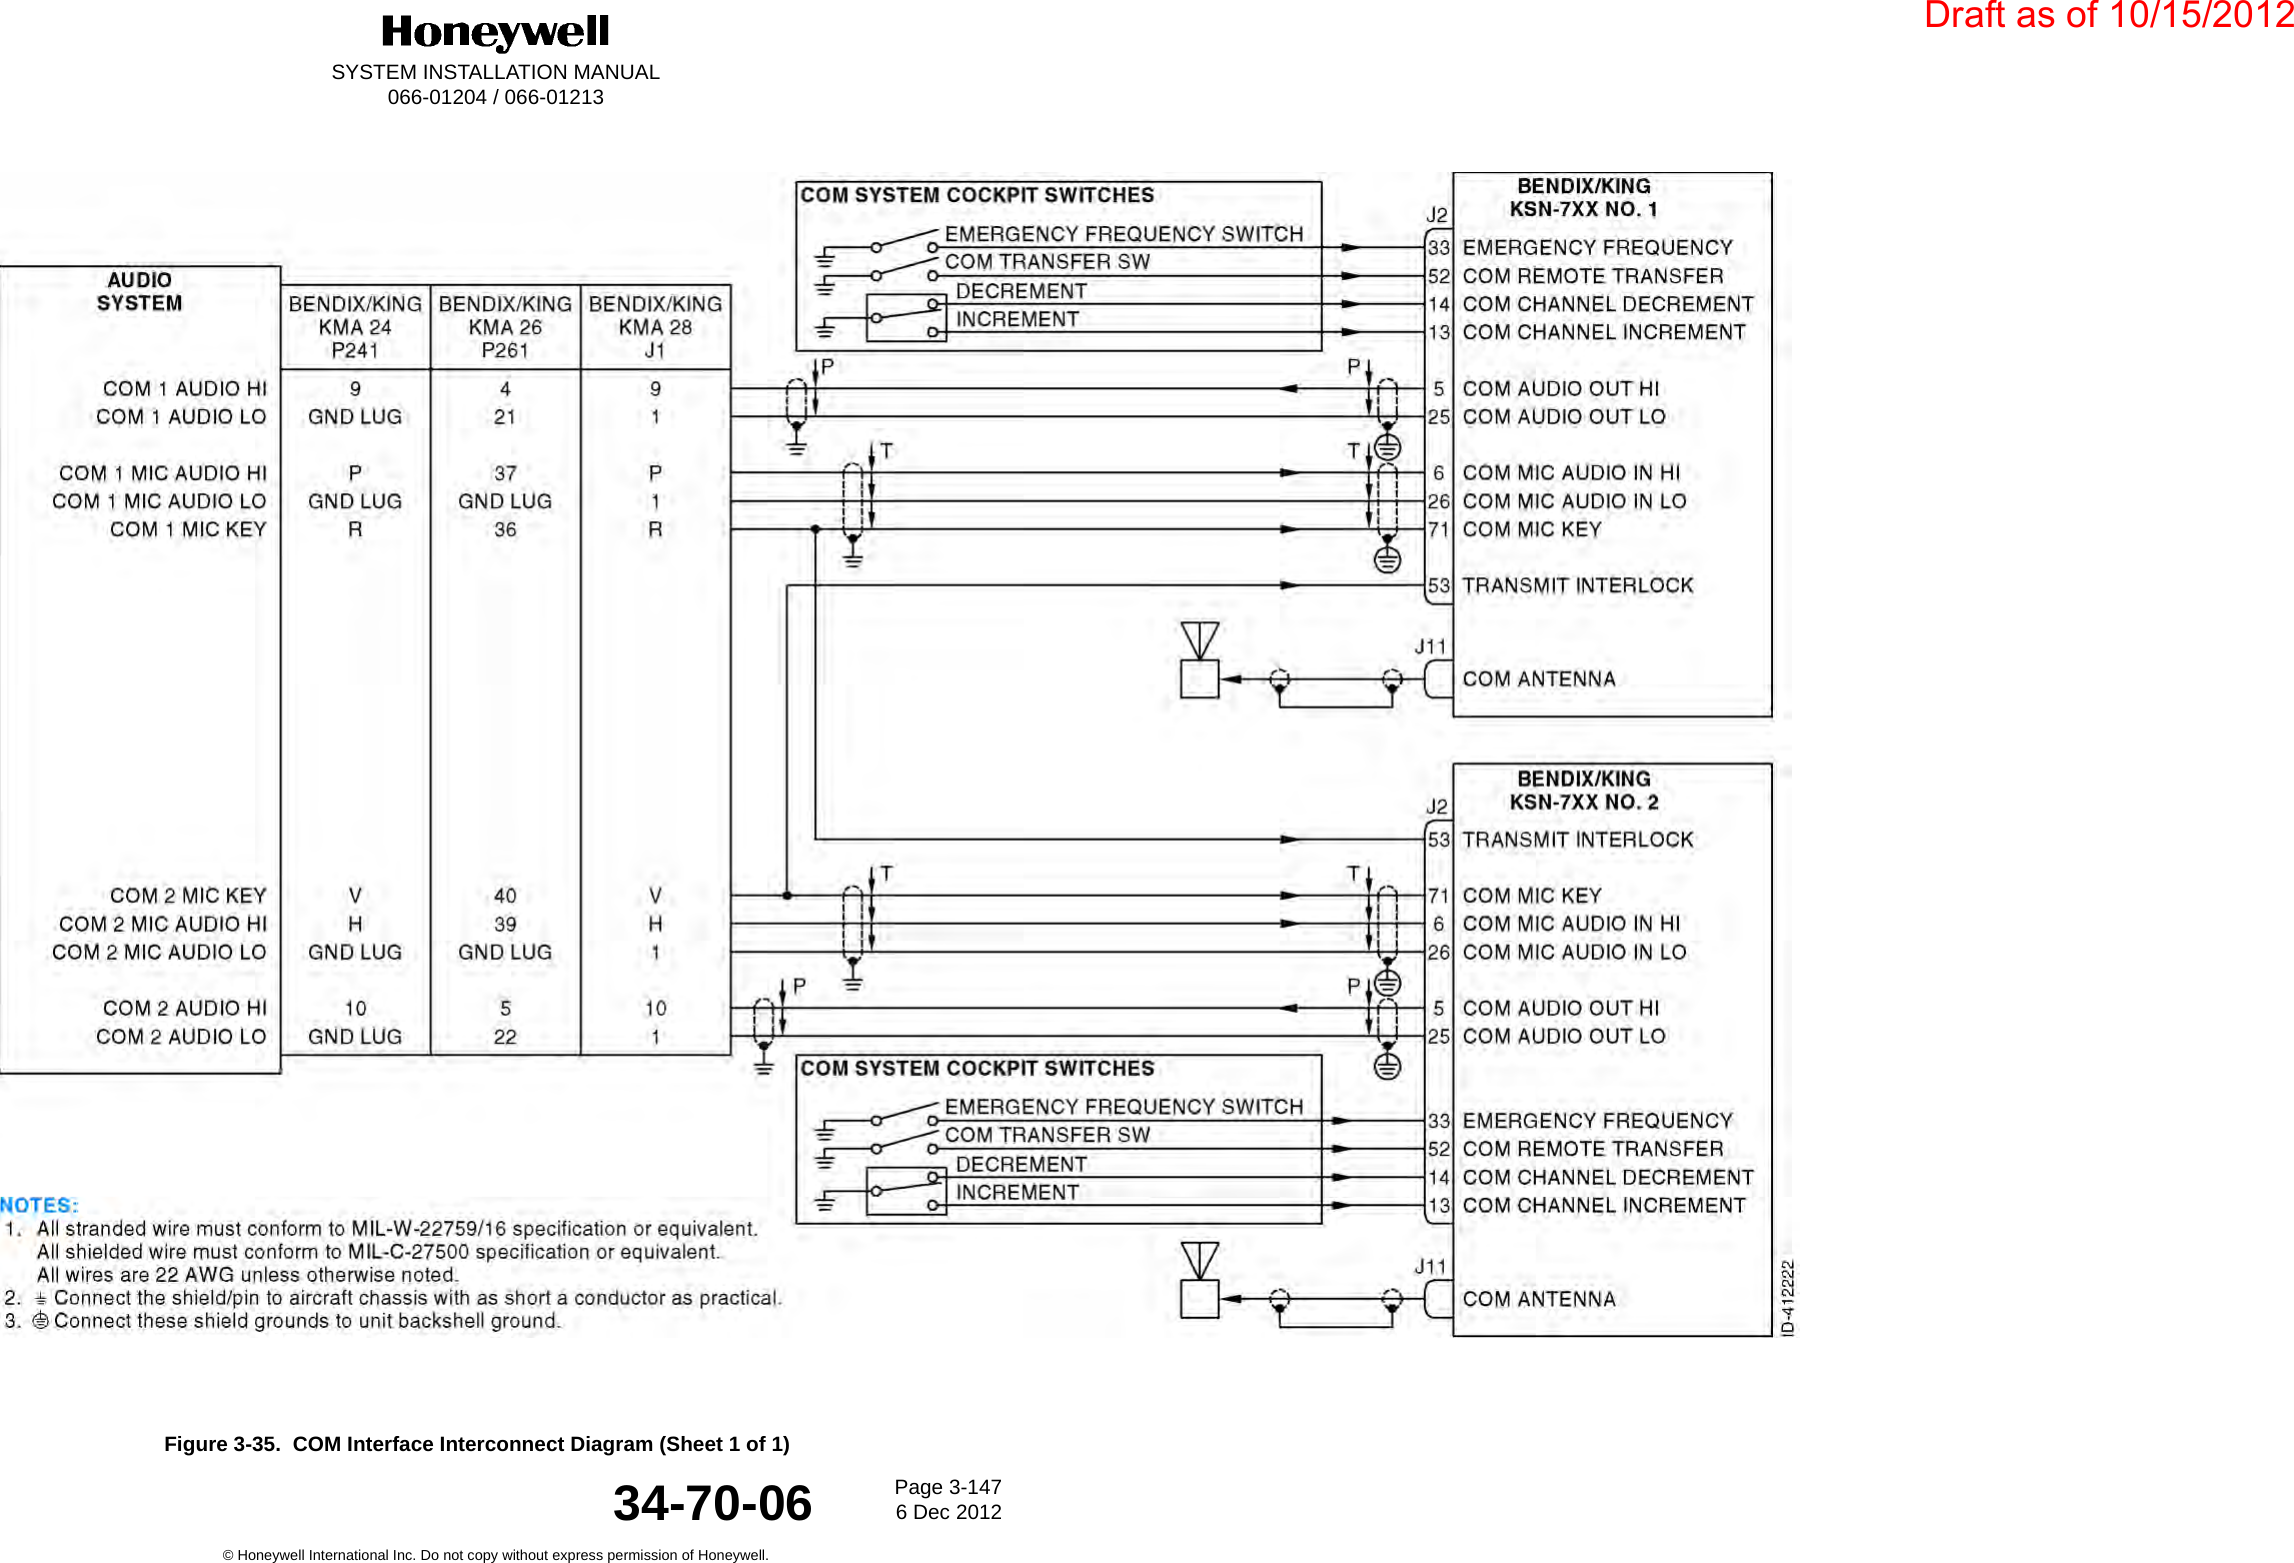 DraftSYSTEM INSTALLATION MANUAL066-01204 / 066-01213Page 3-1476 Dec 2012© Honeywell International Inc. Do not copy without express permission of Honeywell.34-70-06Figure 3-35.  COM Interface Interconnect Diagram (Sheet 1 of 1)Draft as of 10/15/2012